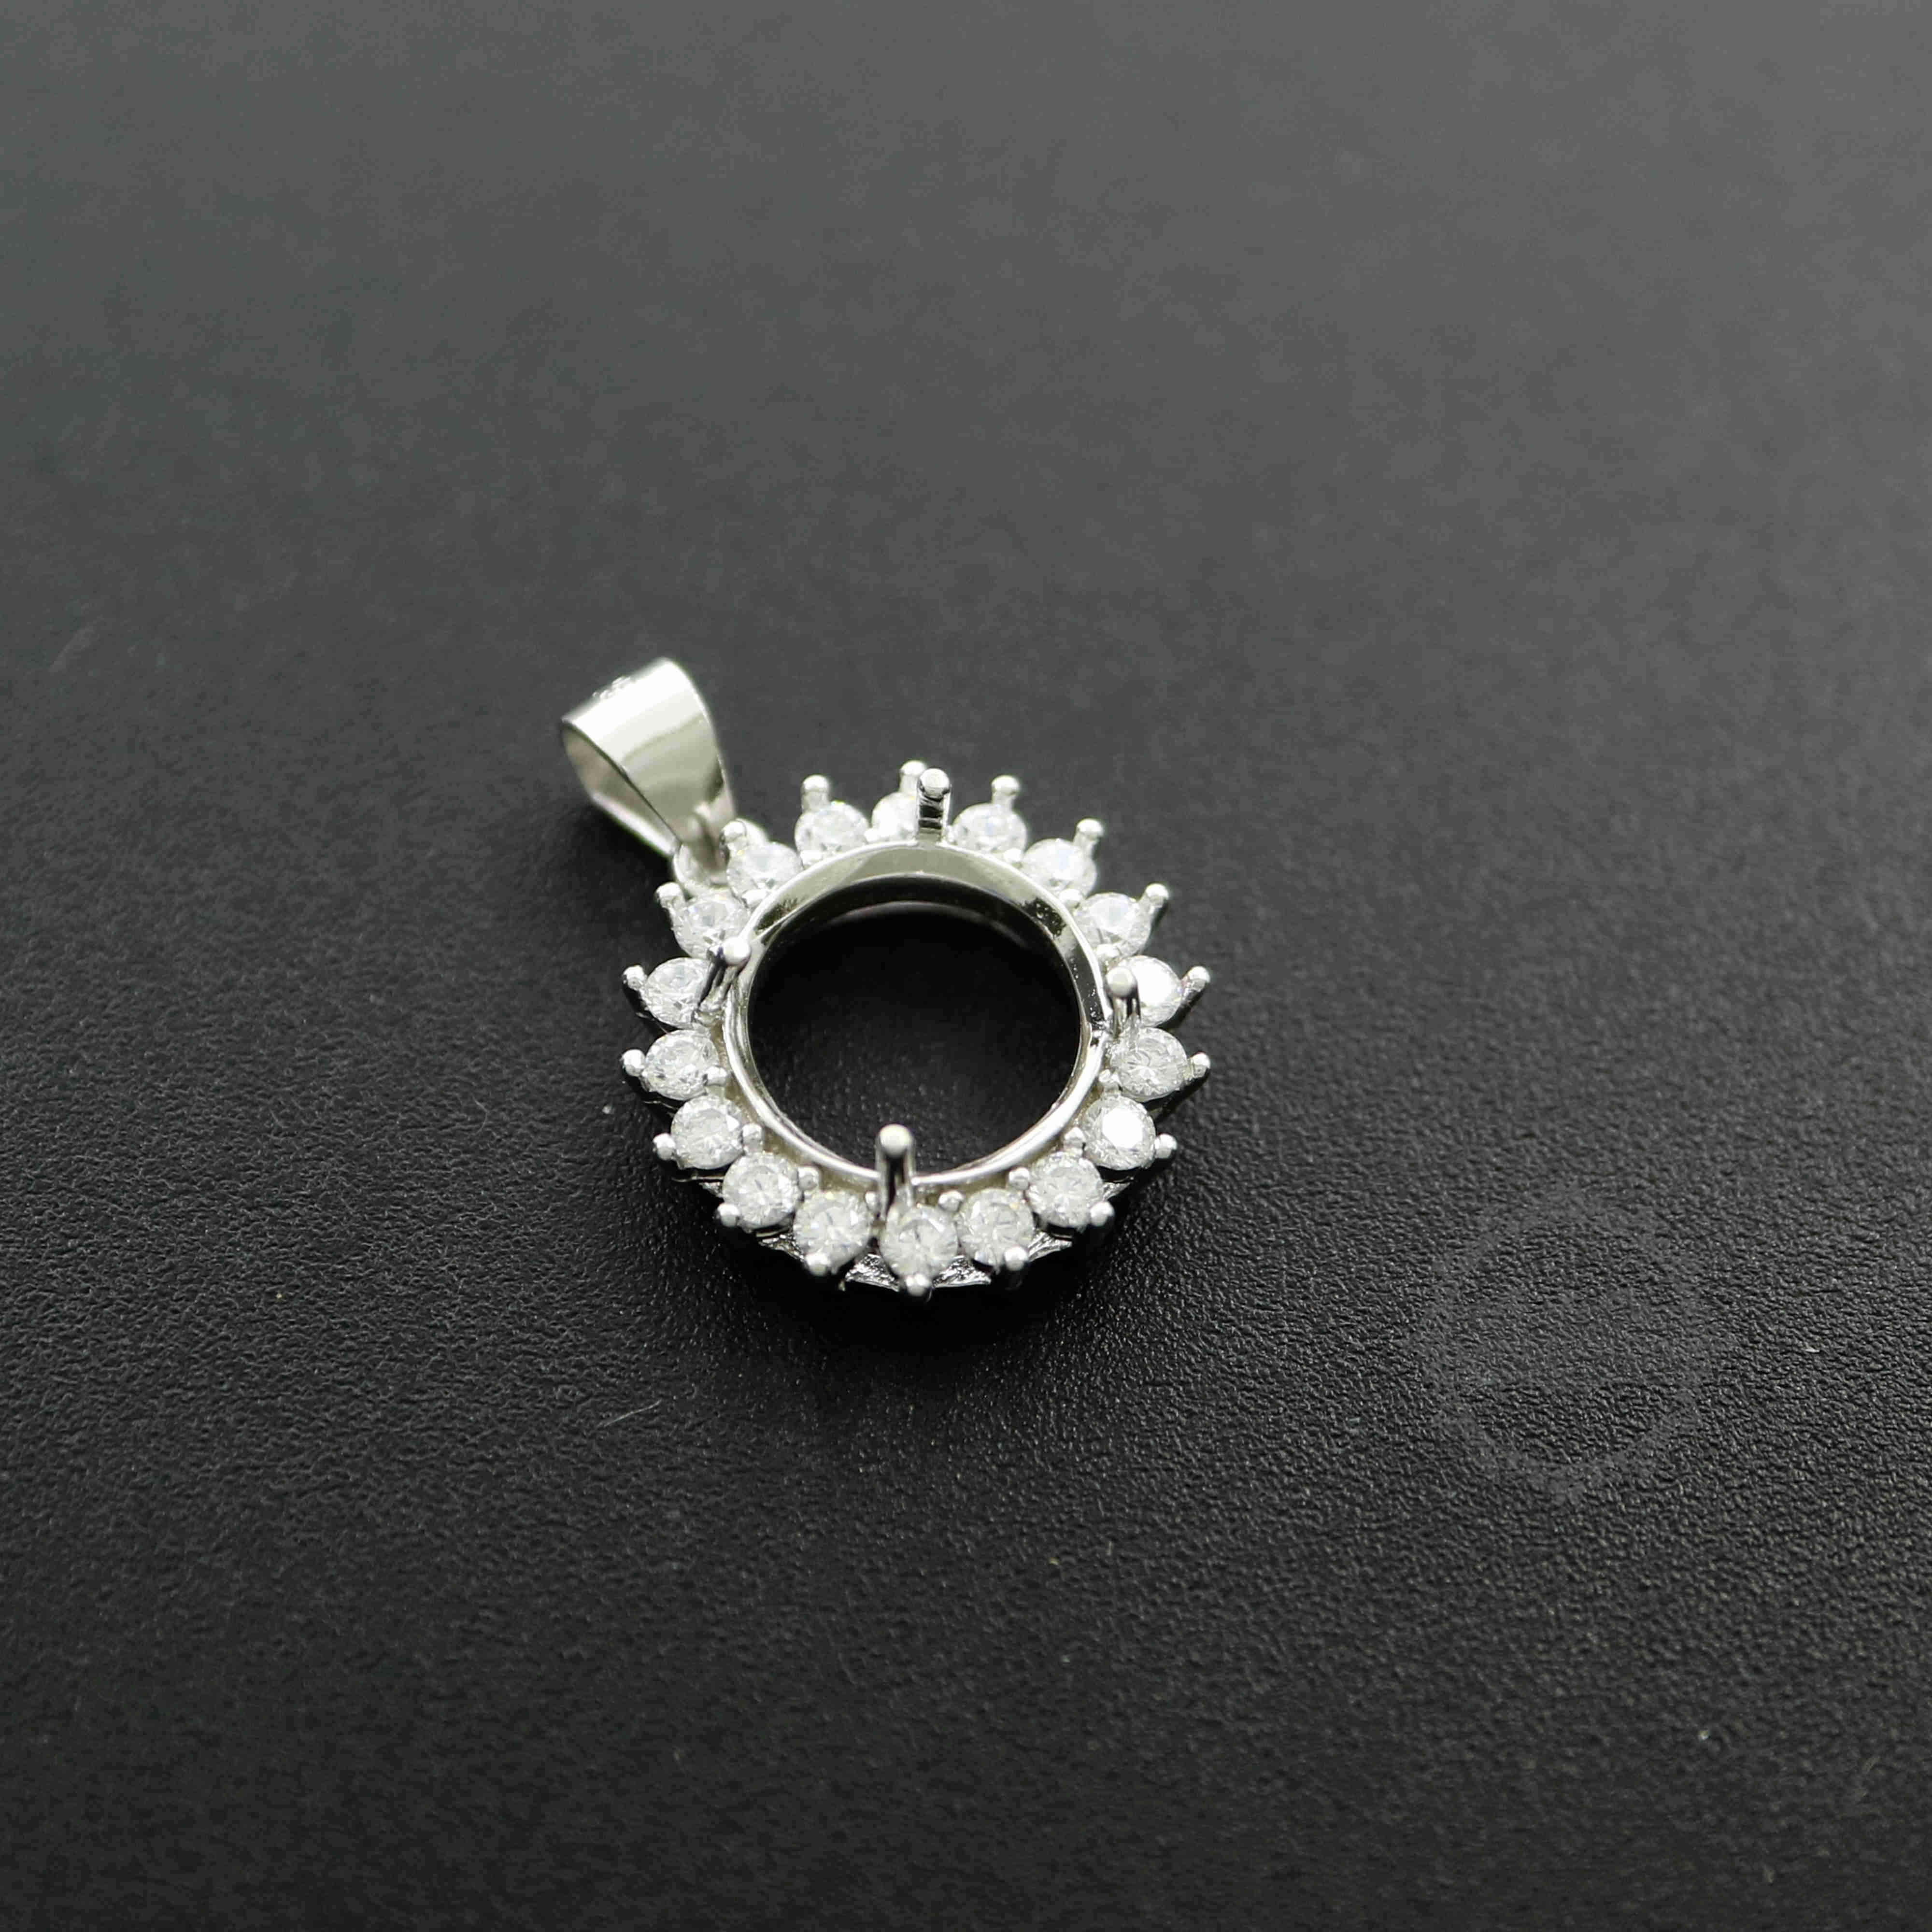 1Pcs 6-15MM Simple Round Prong Bezel Settings For Cz Stone Solid 925 Sterling Silver DIY Pendant Charm Tray 1411210 - Click Image to Close